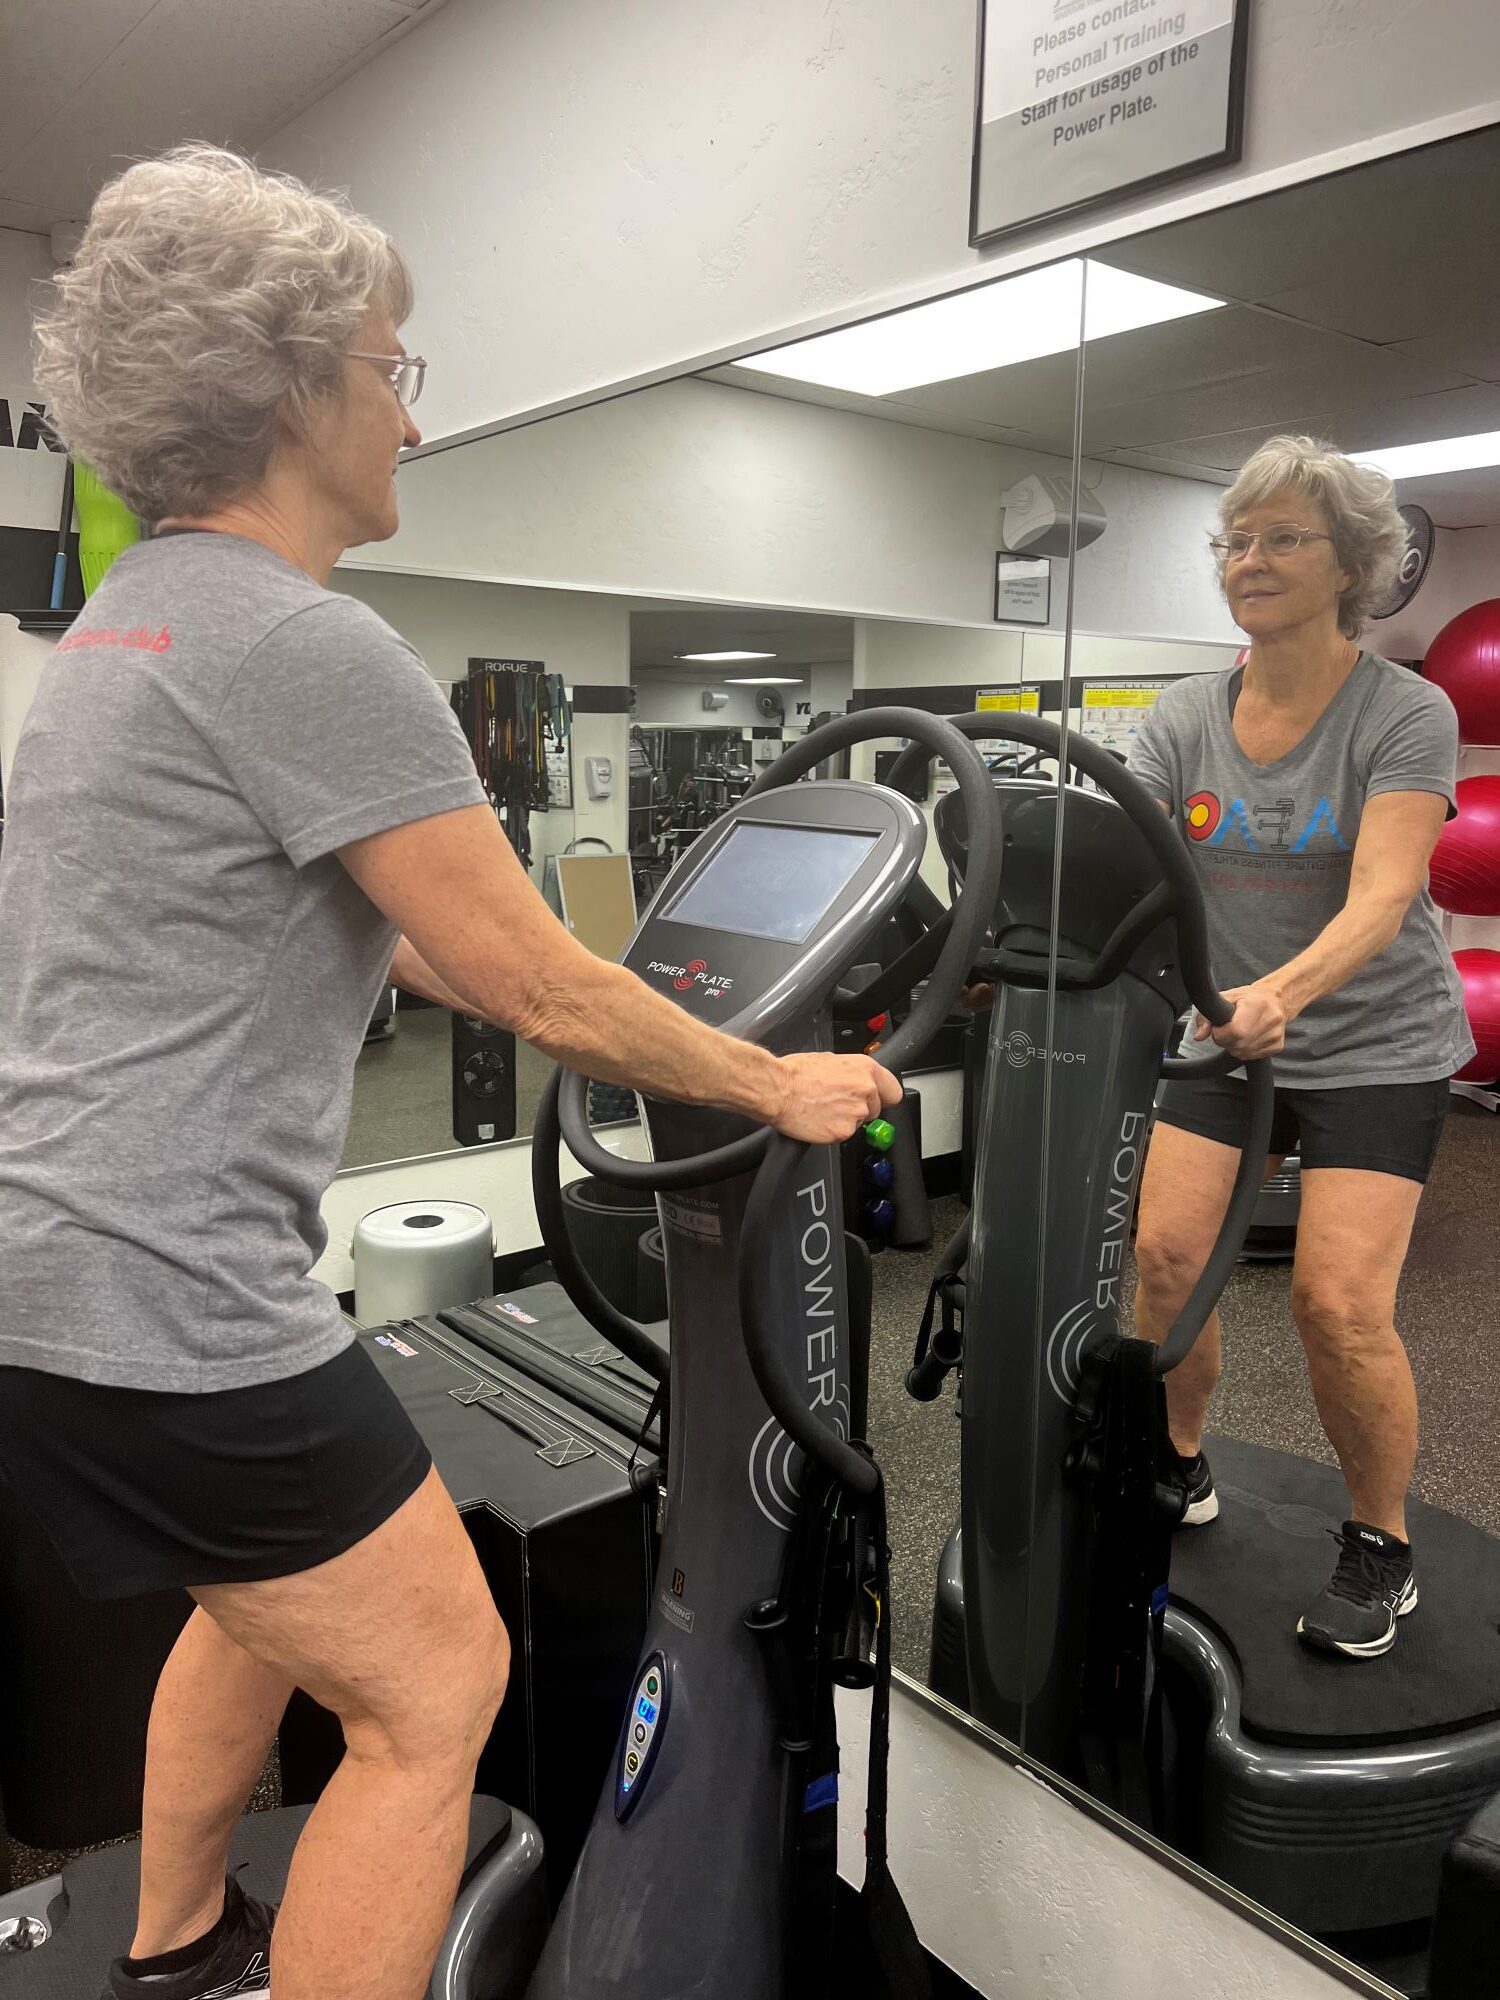 Older woman in gray t-shirt and black shorts stands on a Power Plate at AFAC gym